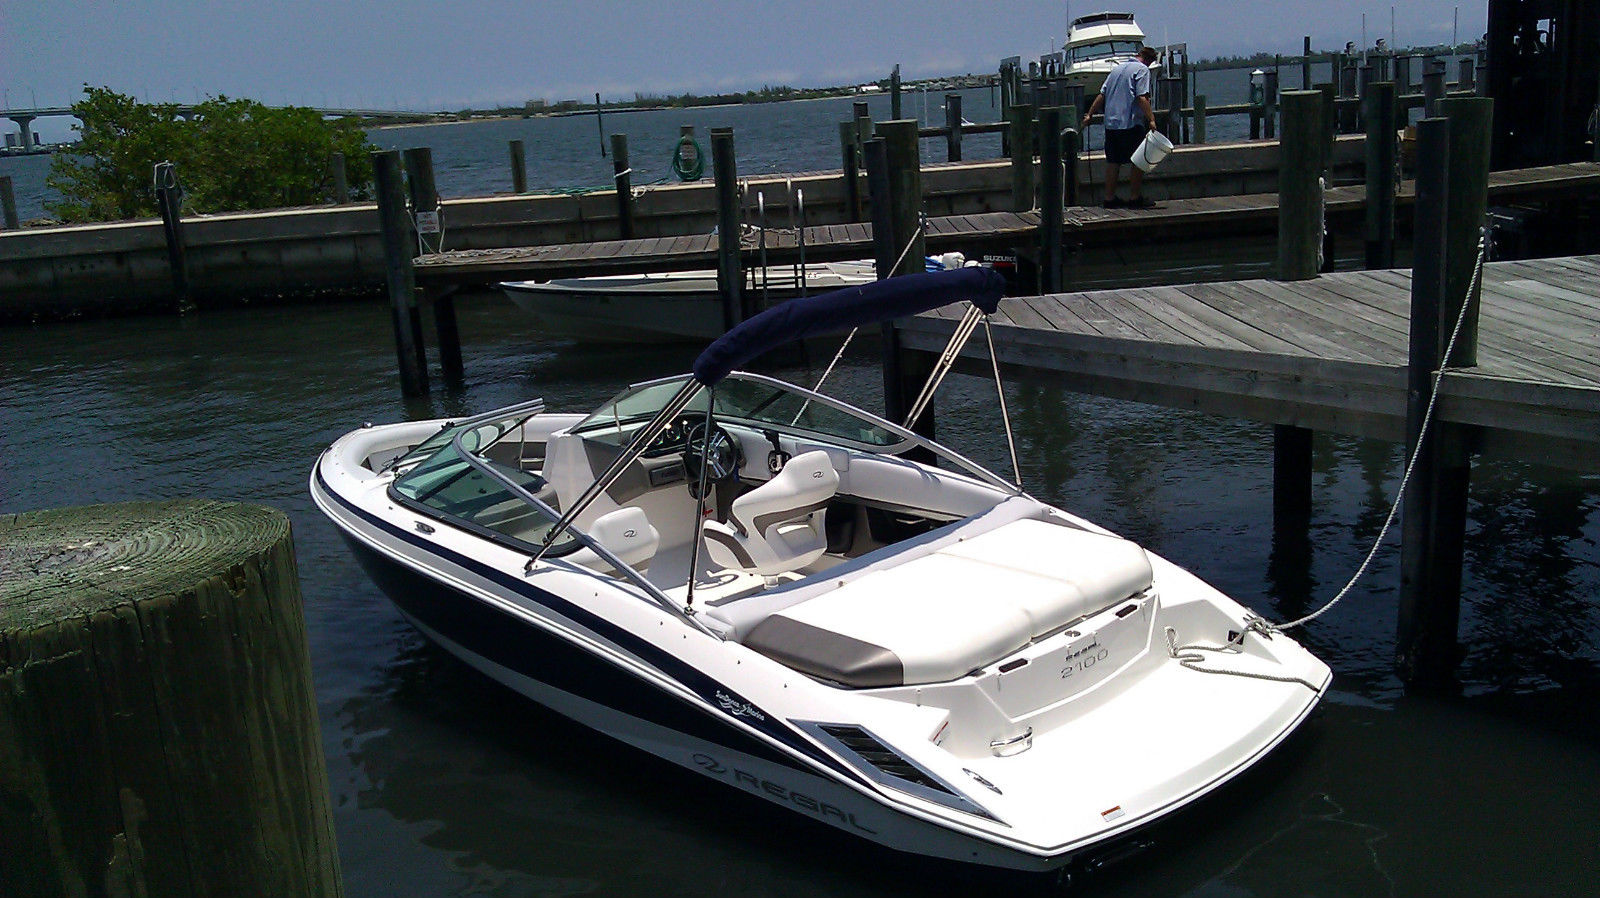 Regal 2100 2011 for sale for $26,950 - Boats-from-USA.com